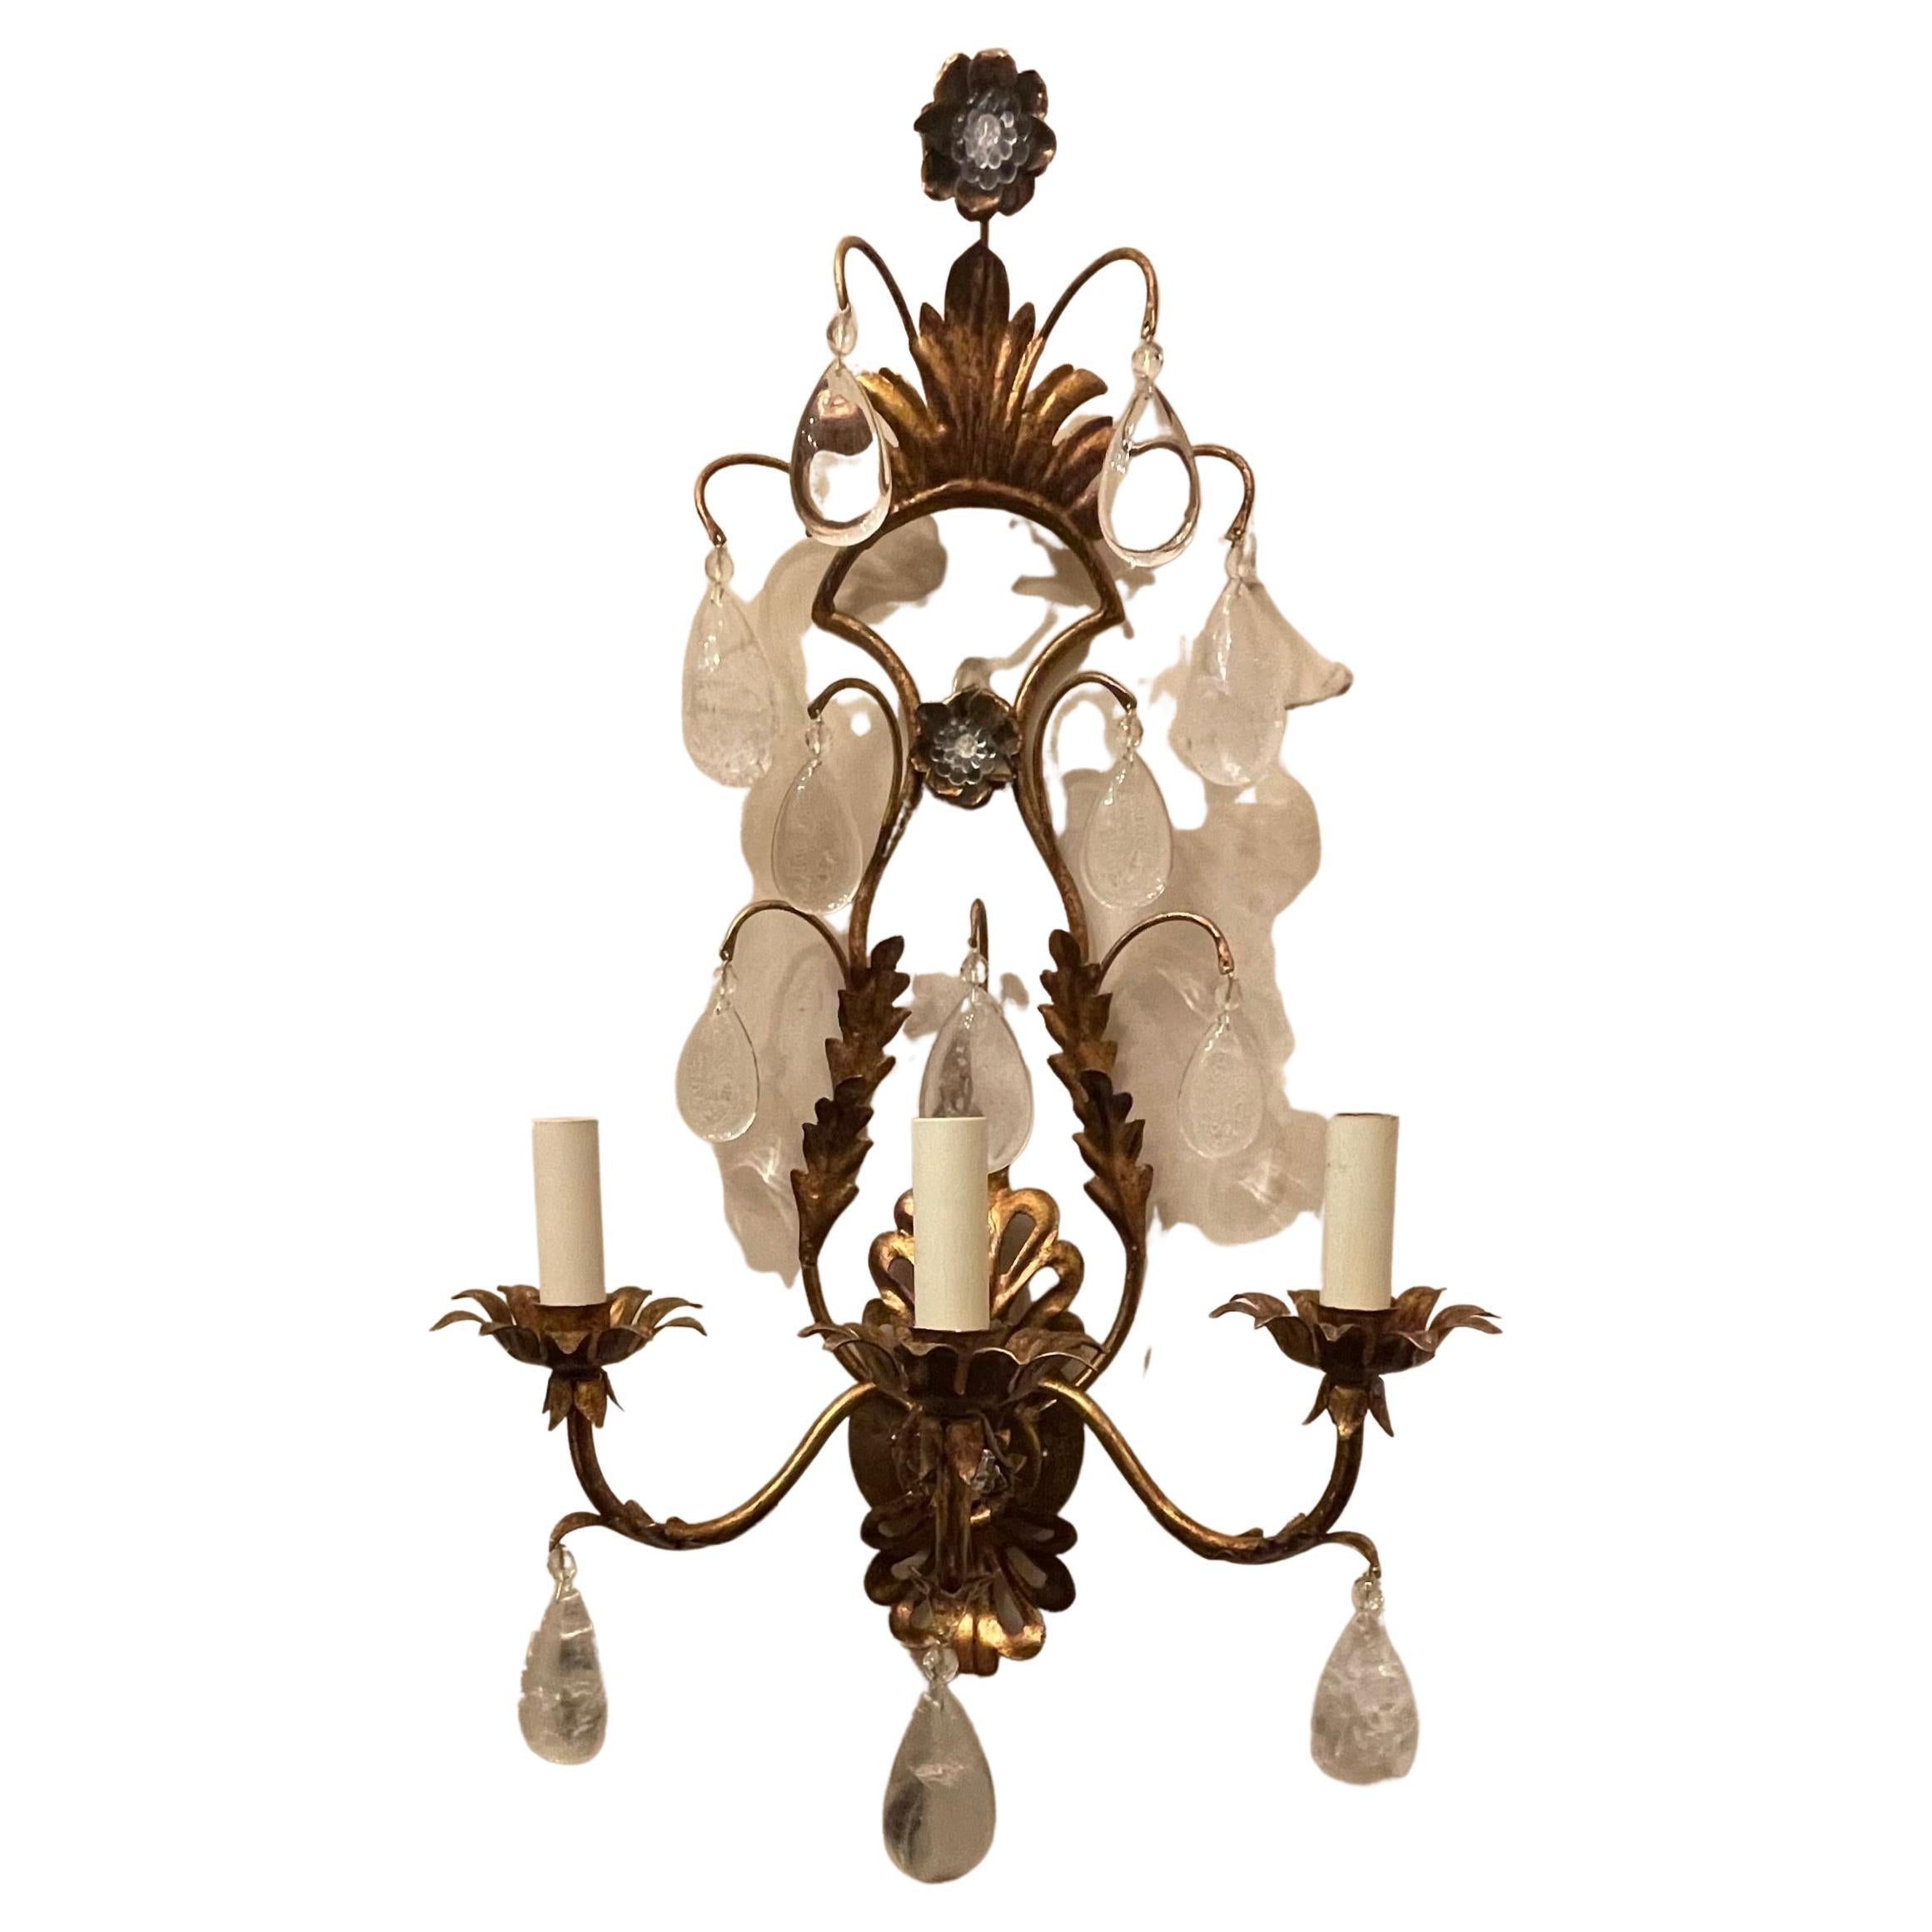 A wonderful pair large Maison Baguès style rock crystal / crystal drop gold gilt tole filigree sconces by Vaughan designs with UL listing, ready to install with mounting hardware.